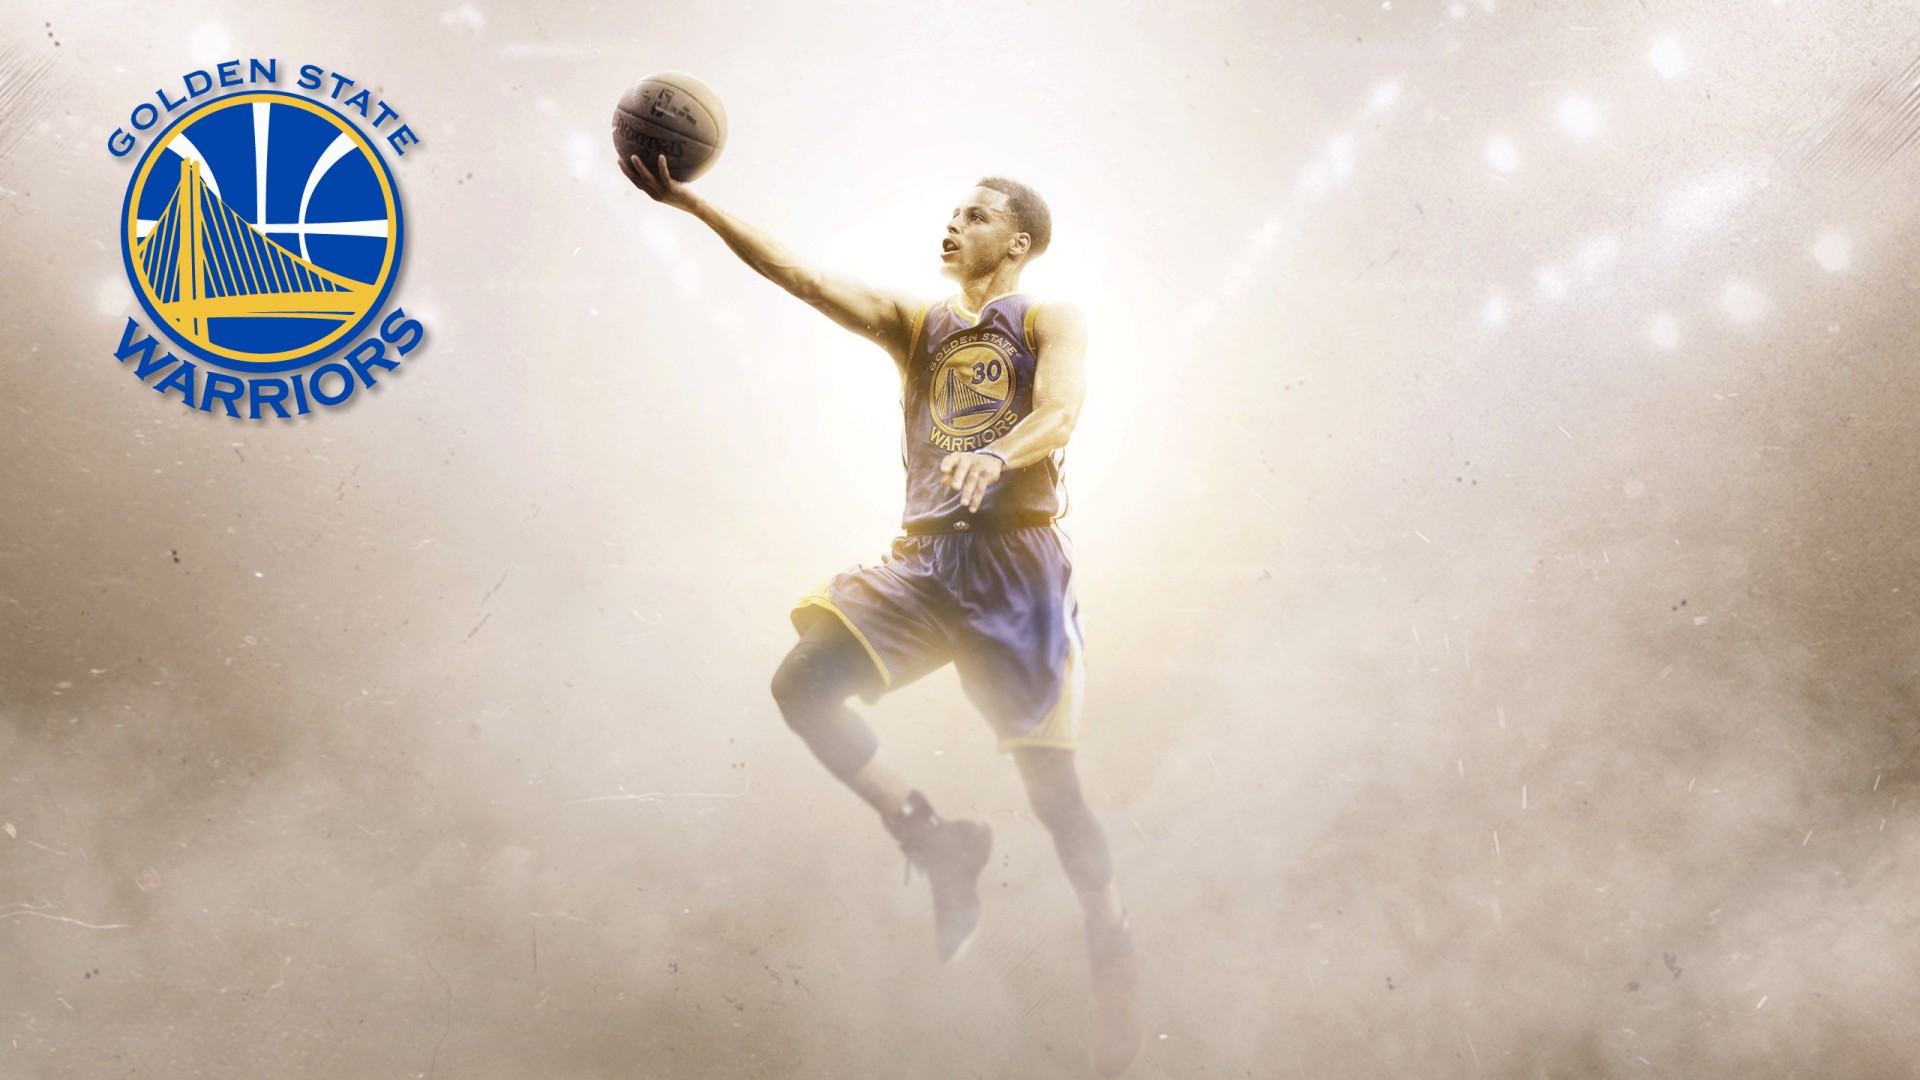 Stephen Curry Mac Backgrounds with image dimensions 1920x1080 pixel. You can make this wallpaper for your Desktop Computer Backgrounds, Windows or Mac Screensavers, iPhone Lock screen, Tablet or Android and another Mobile Phone device